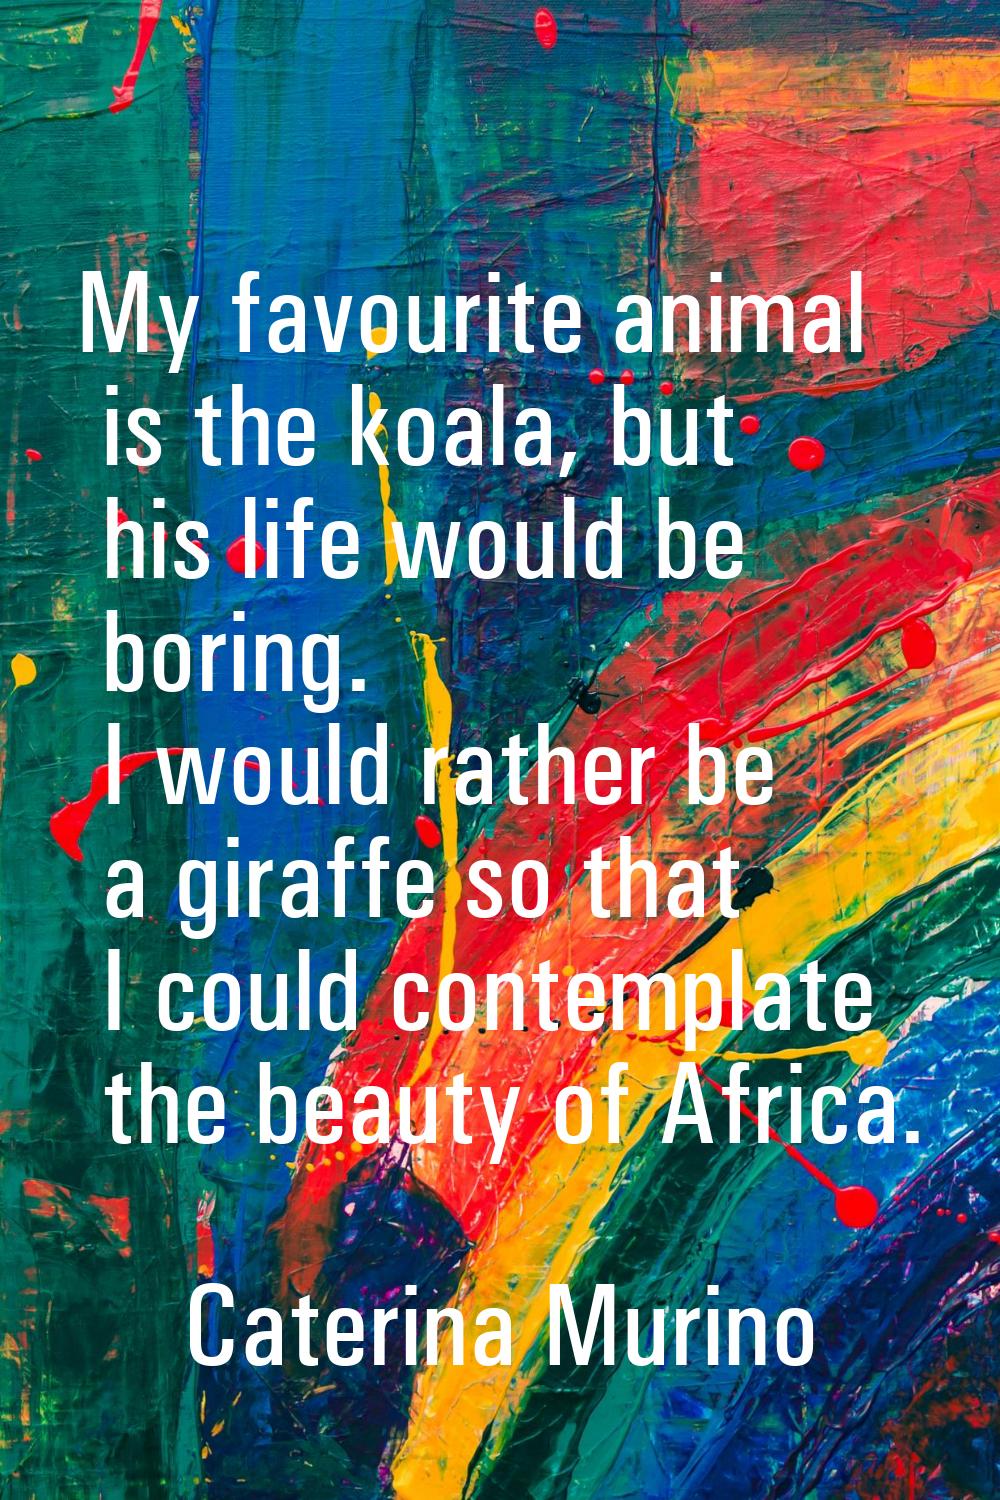 My favourite animal is the koala, but his life would be boring. I would rather be a giraffe so that